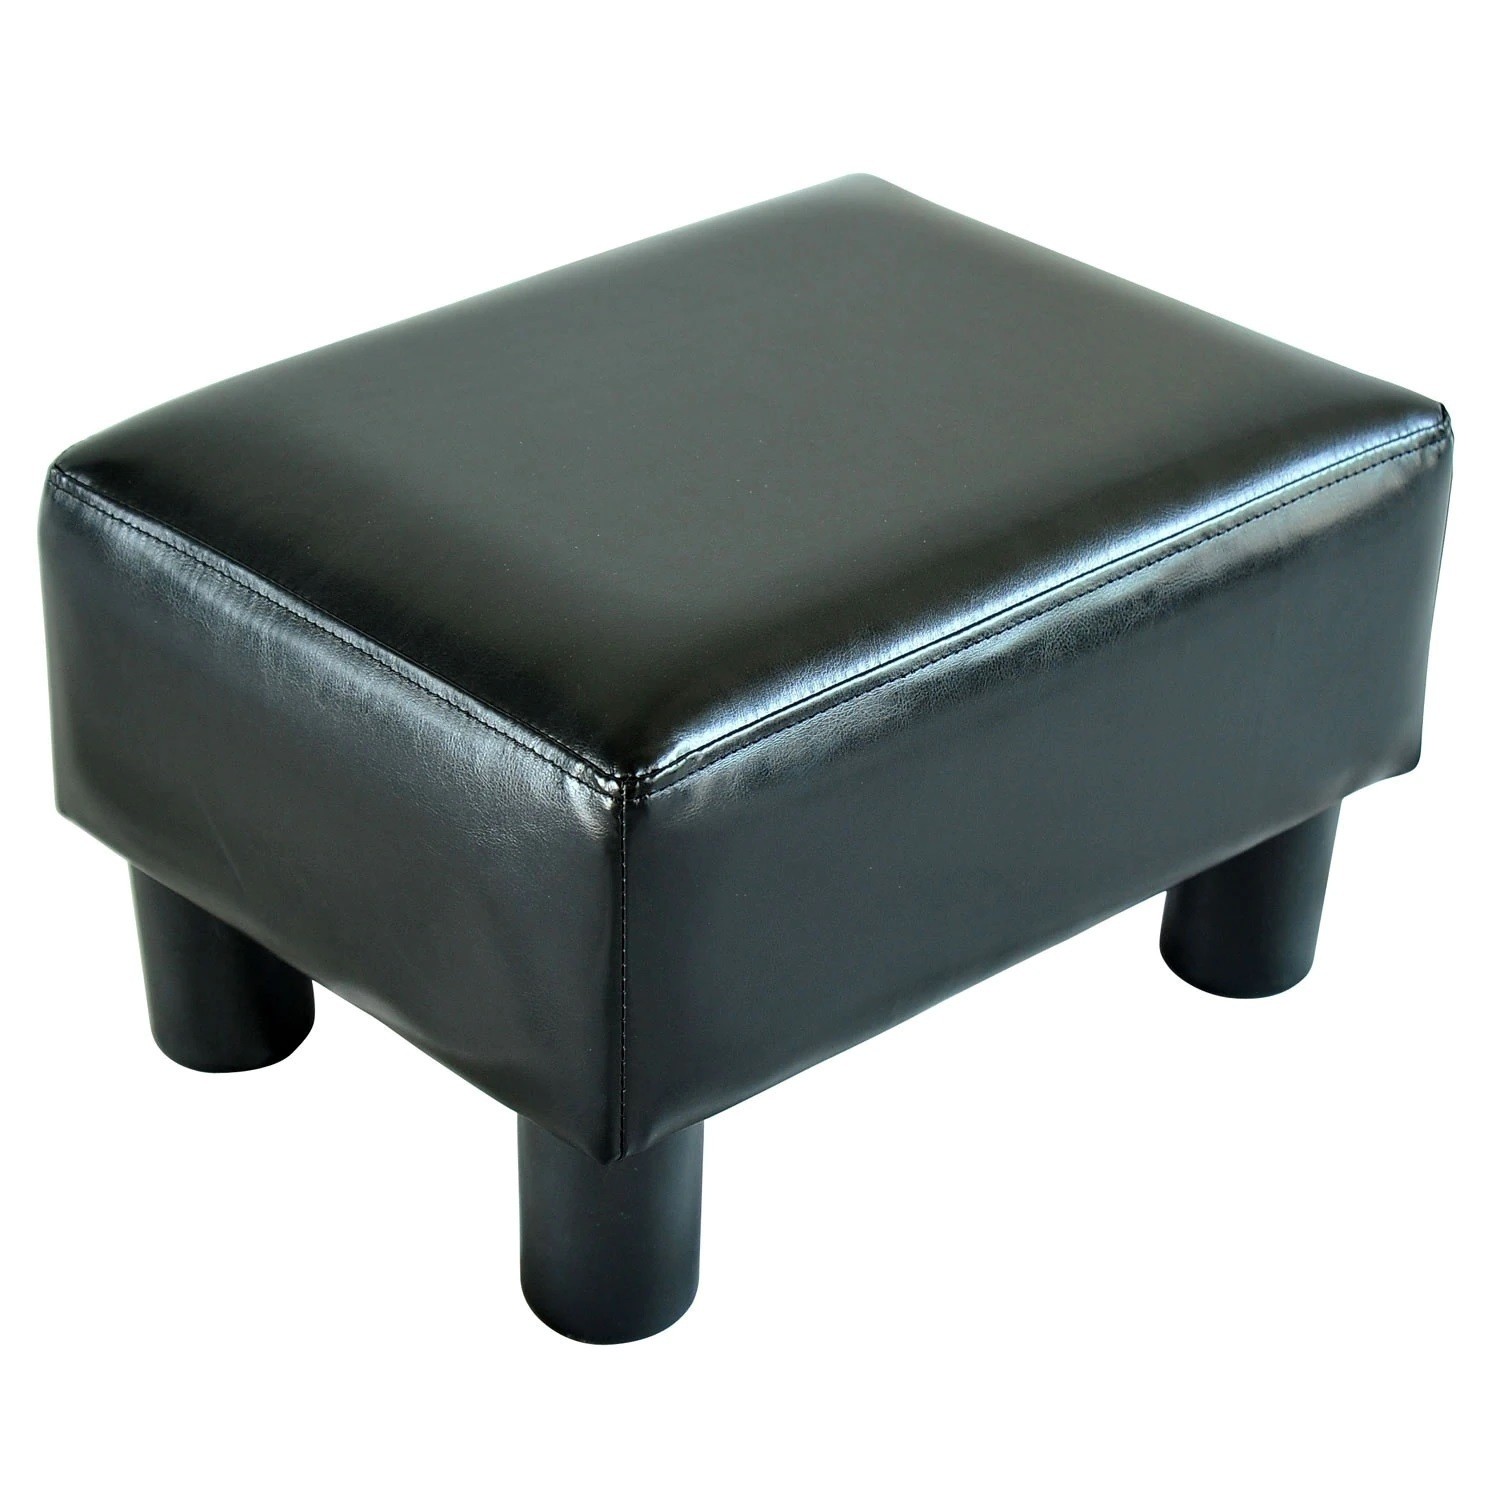 Small foot stool made of leather